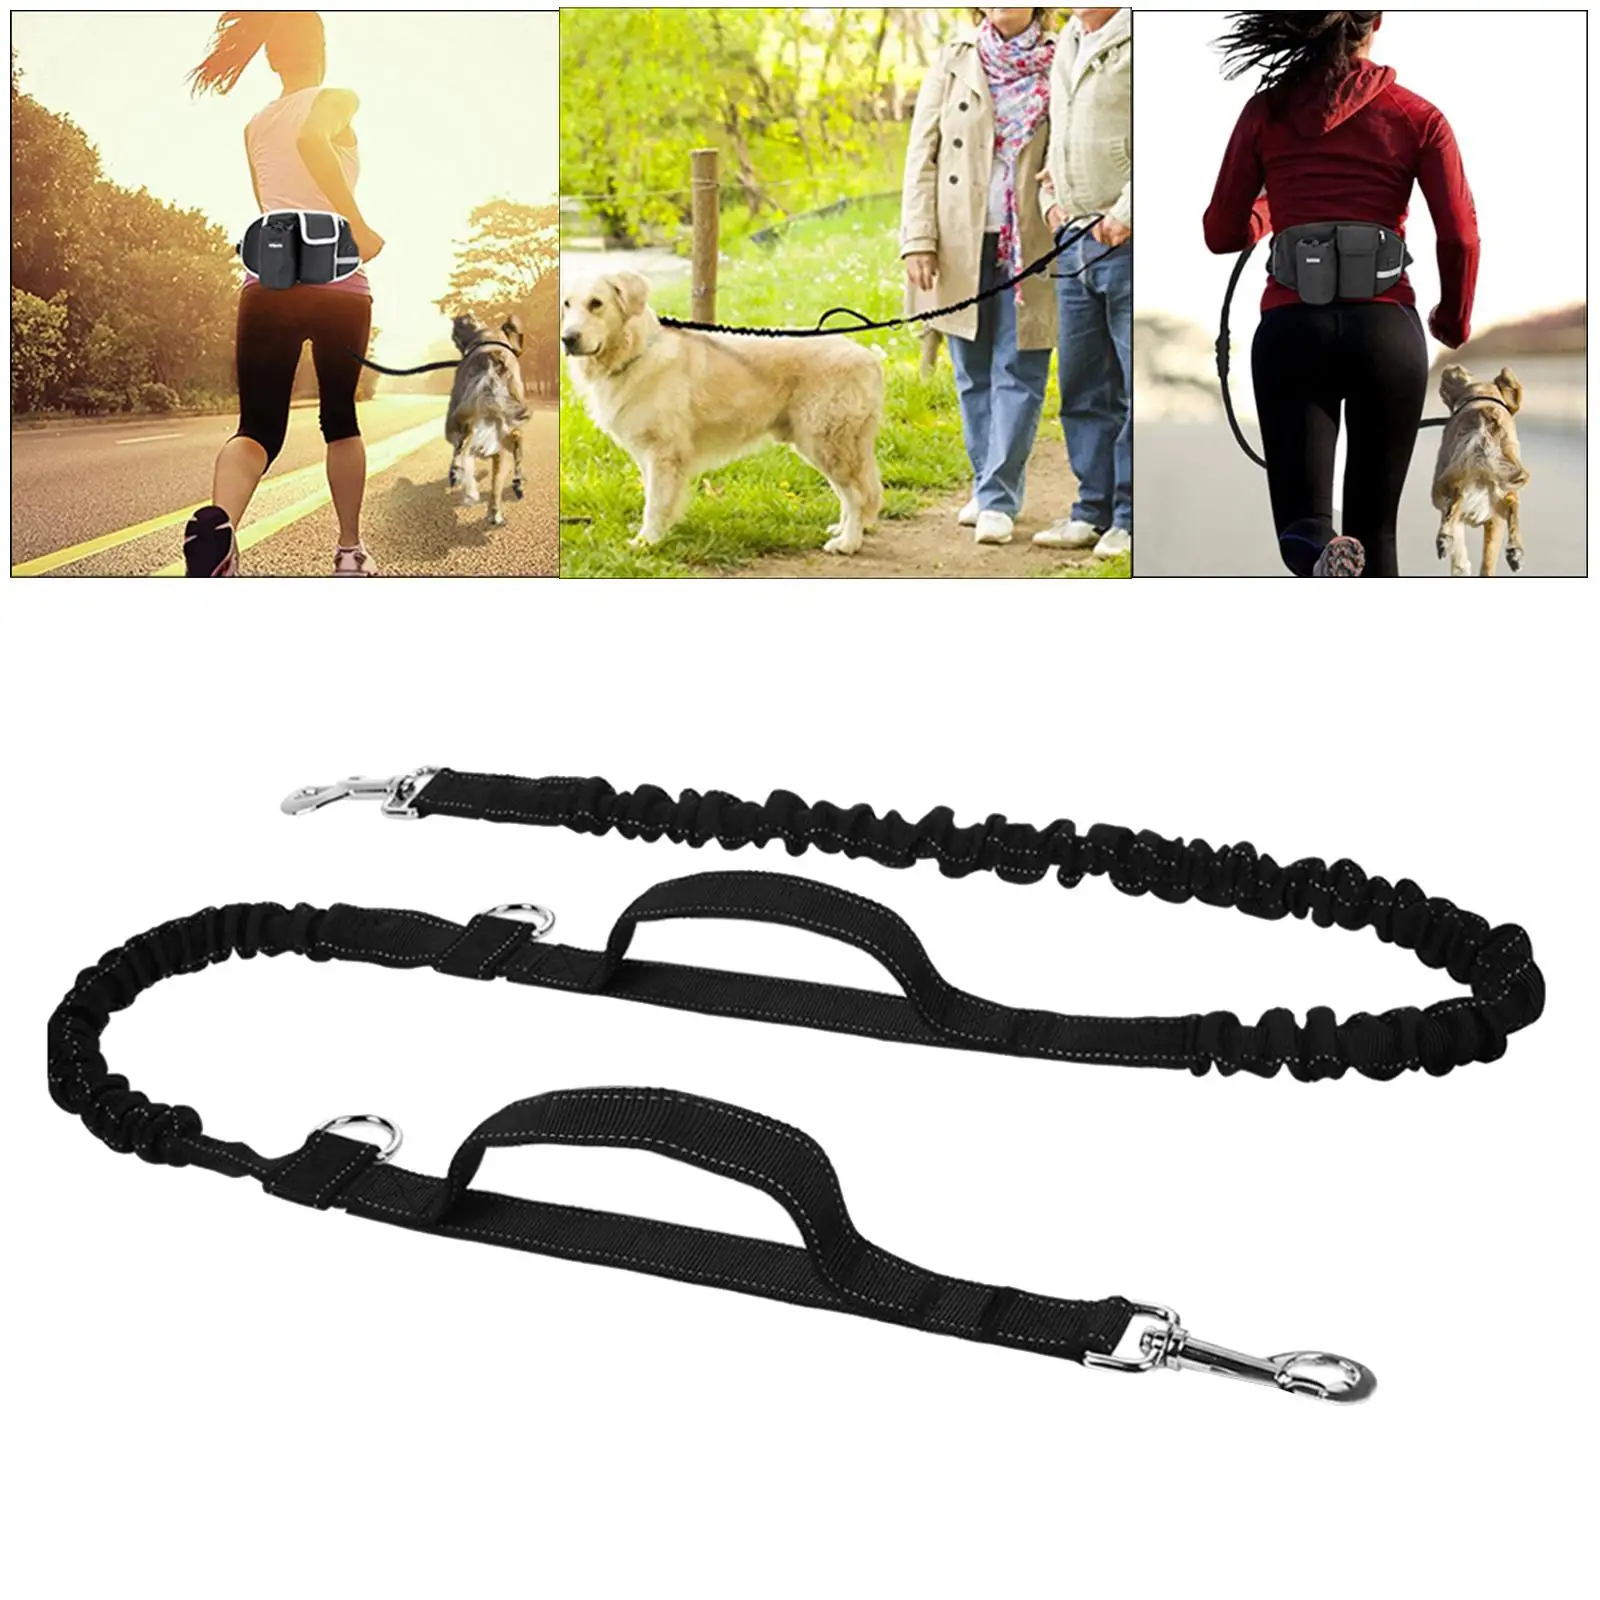 Hands Free Dog Leash Dog Treat Pouch Retractable Bungee Leash for Hiking